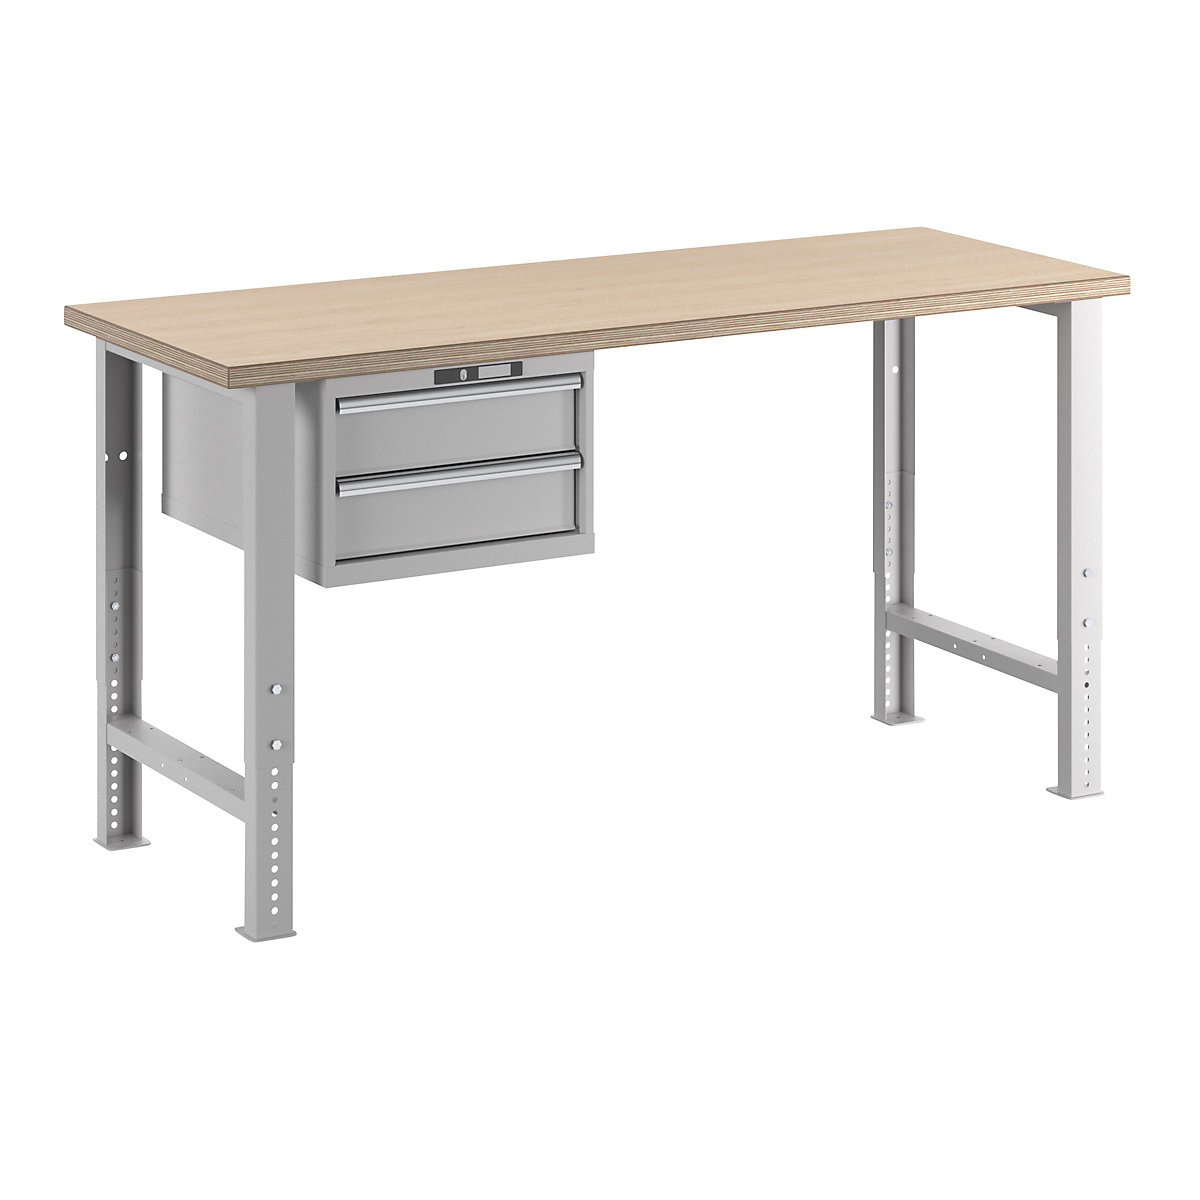 Modular workbench – LISTA, height 740 – 1090 mm, suspended drawer unit, 2 drawers, light grey, table width 2000 mm-12